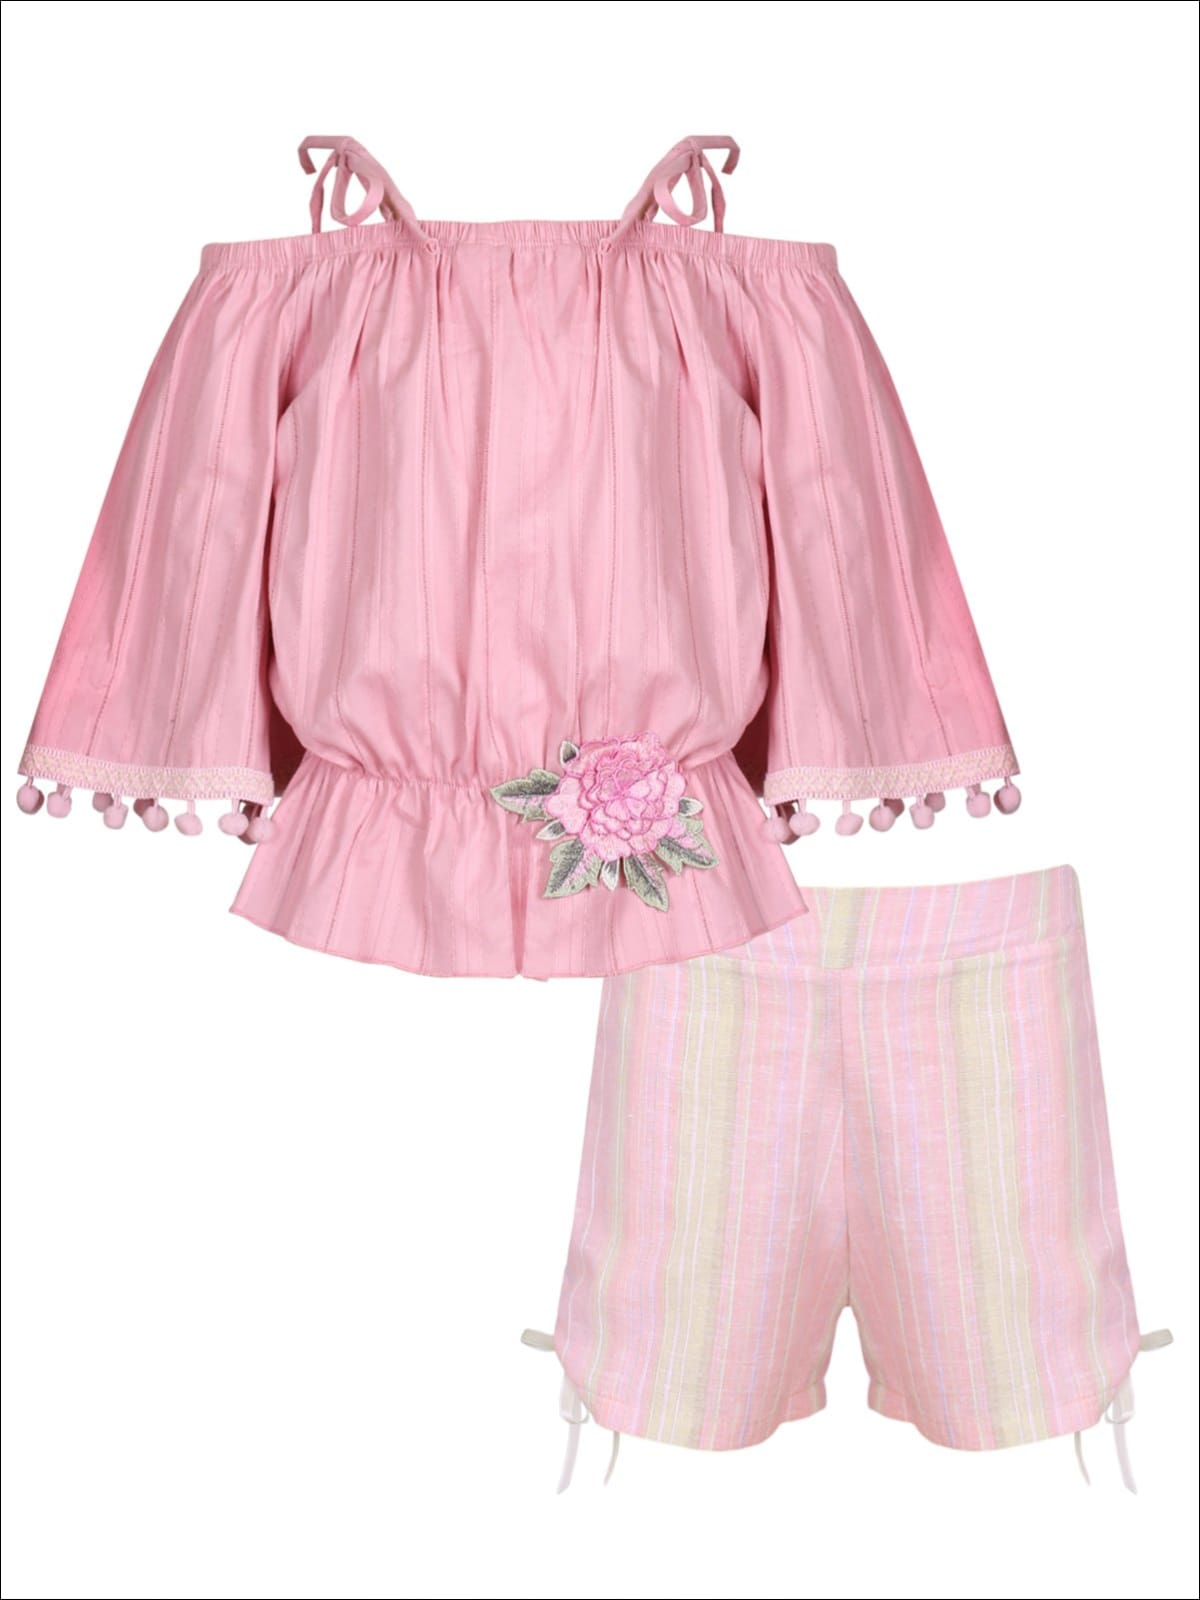 Girls Trimmed Off the Shoulder Strap Flare Sleeve Tunic & Drawstring Shorts Set - Pink / 2T/3T - Girls Spring Casual Set